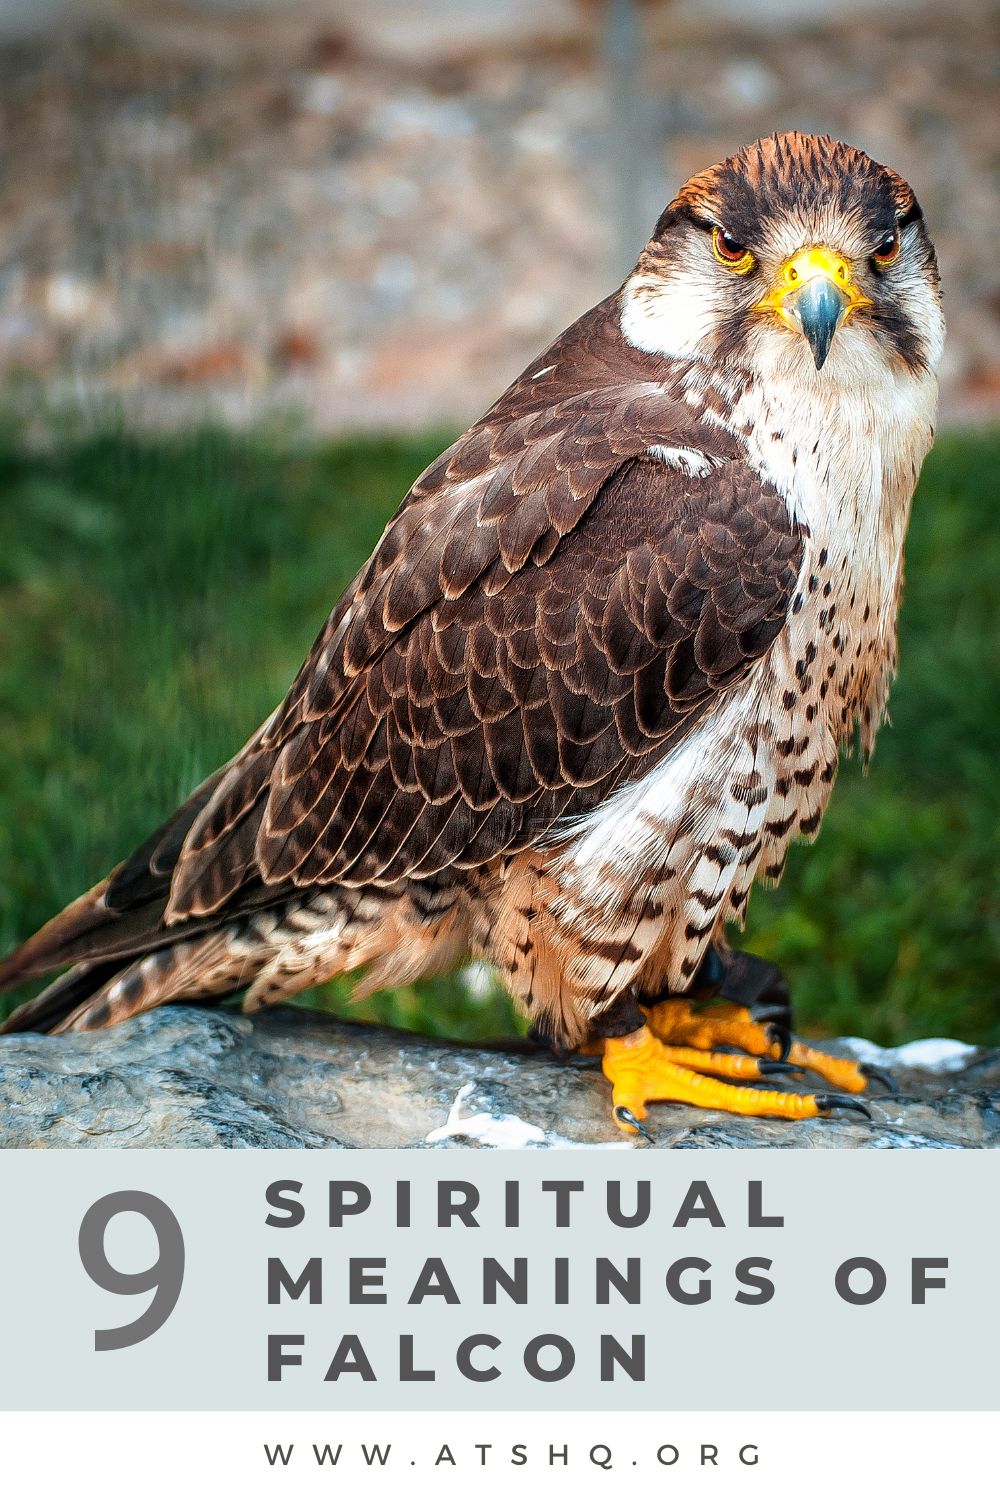 Falcon Meanings